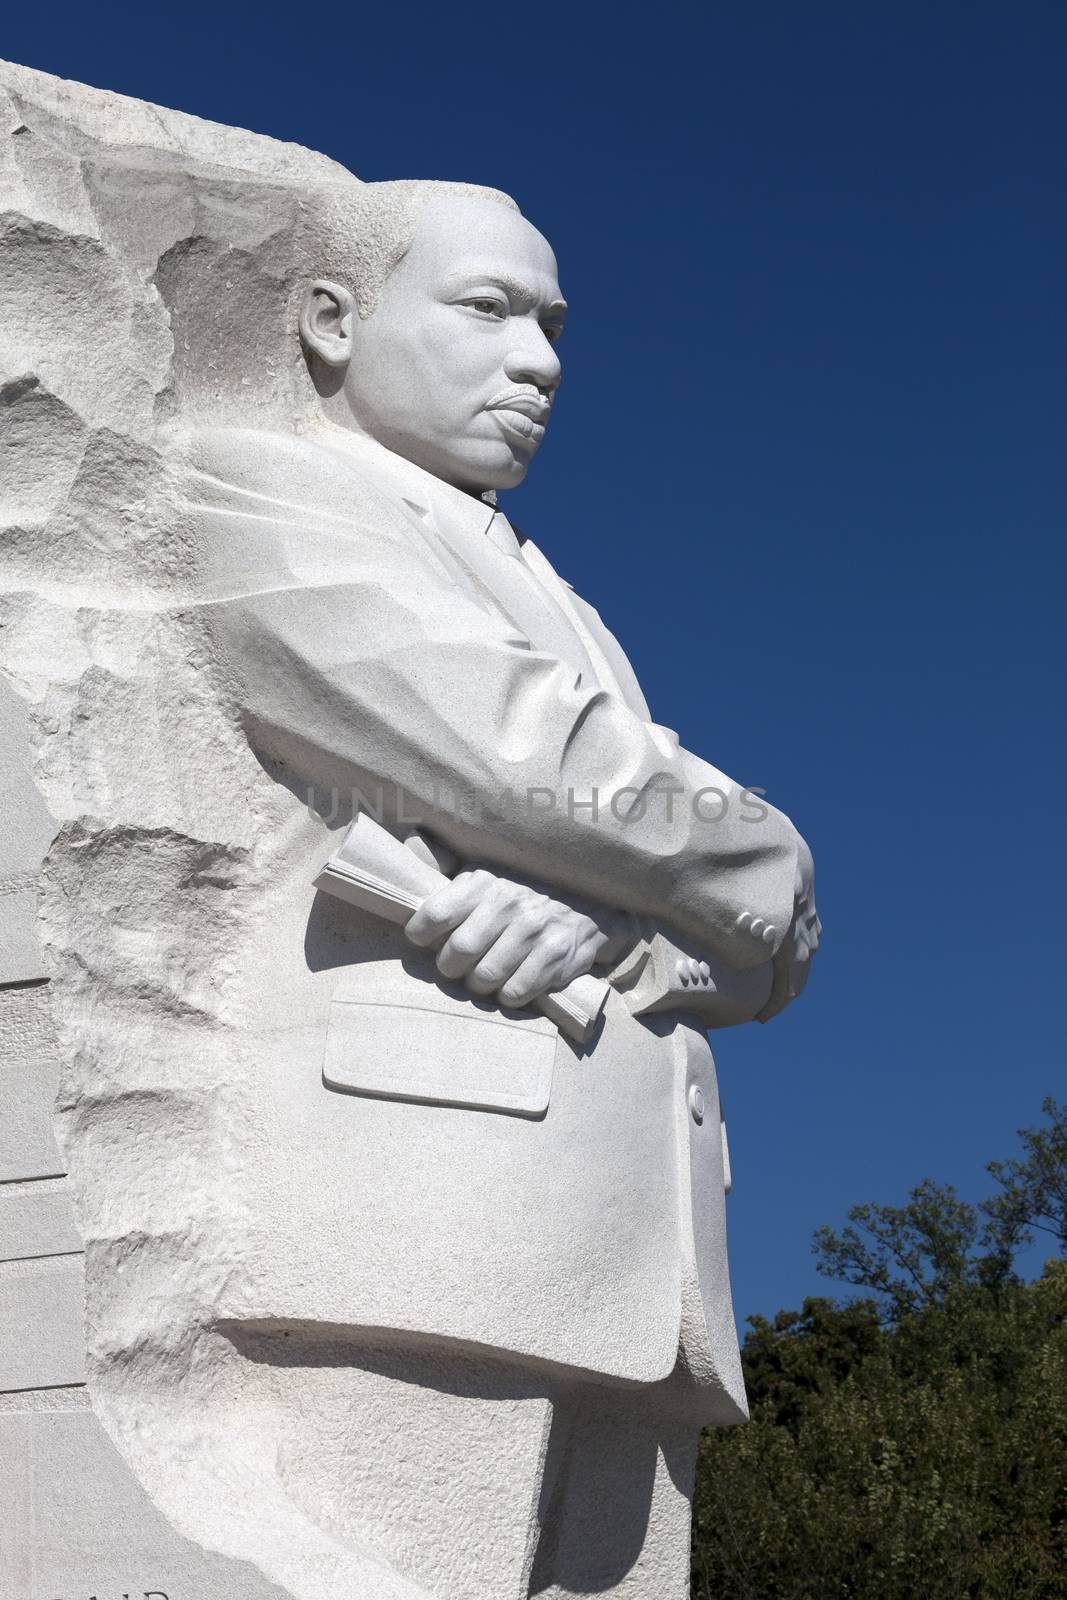 The Martin Luther King Jr. Memorial by hanusst